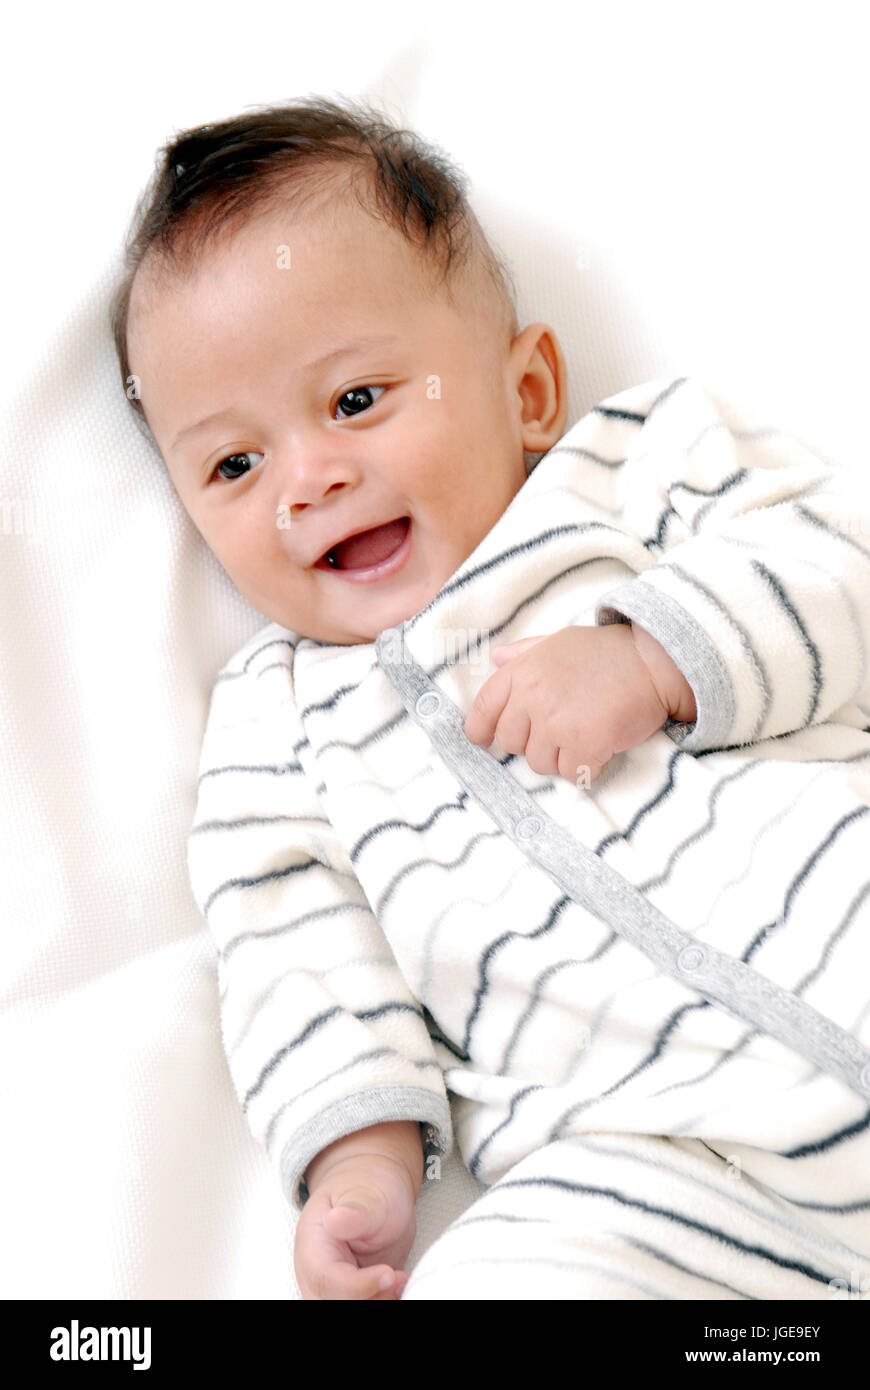 Cute baby, with with background, playing Stock Photo